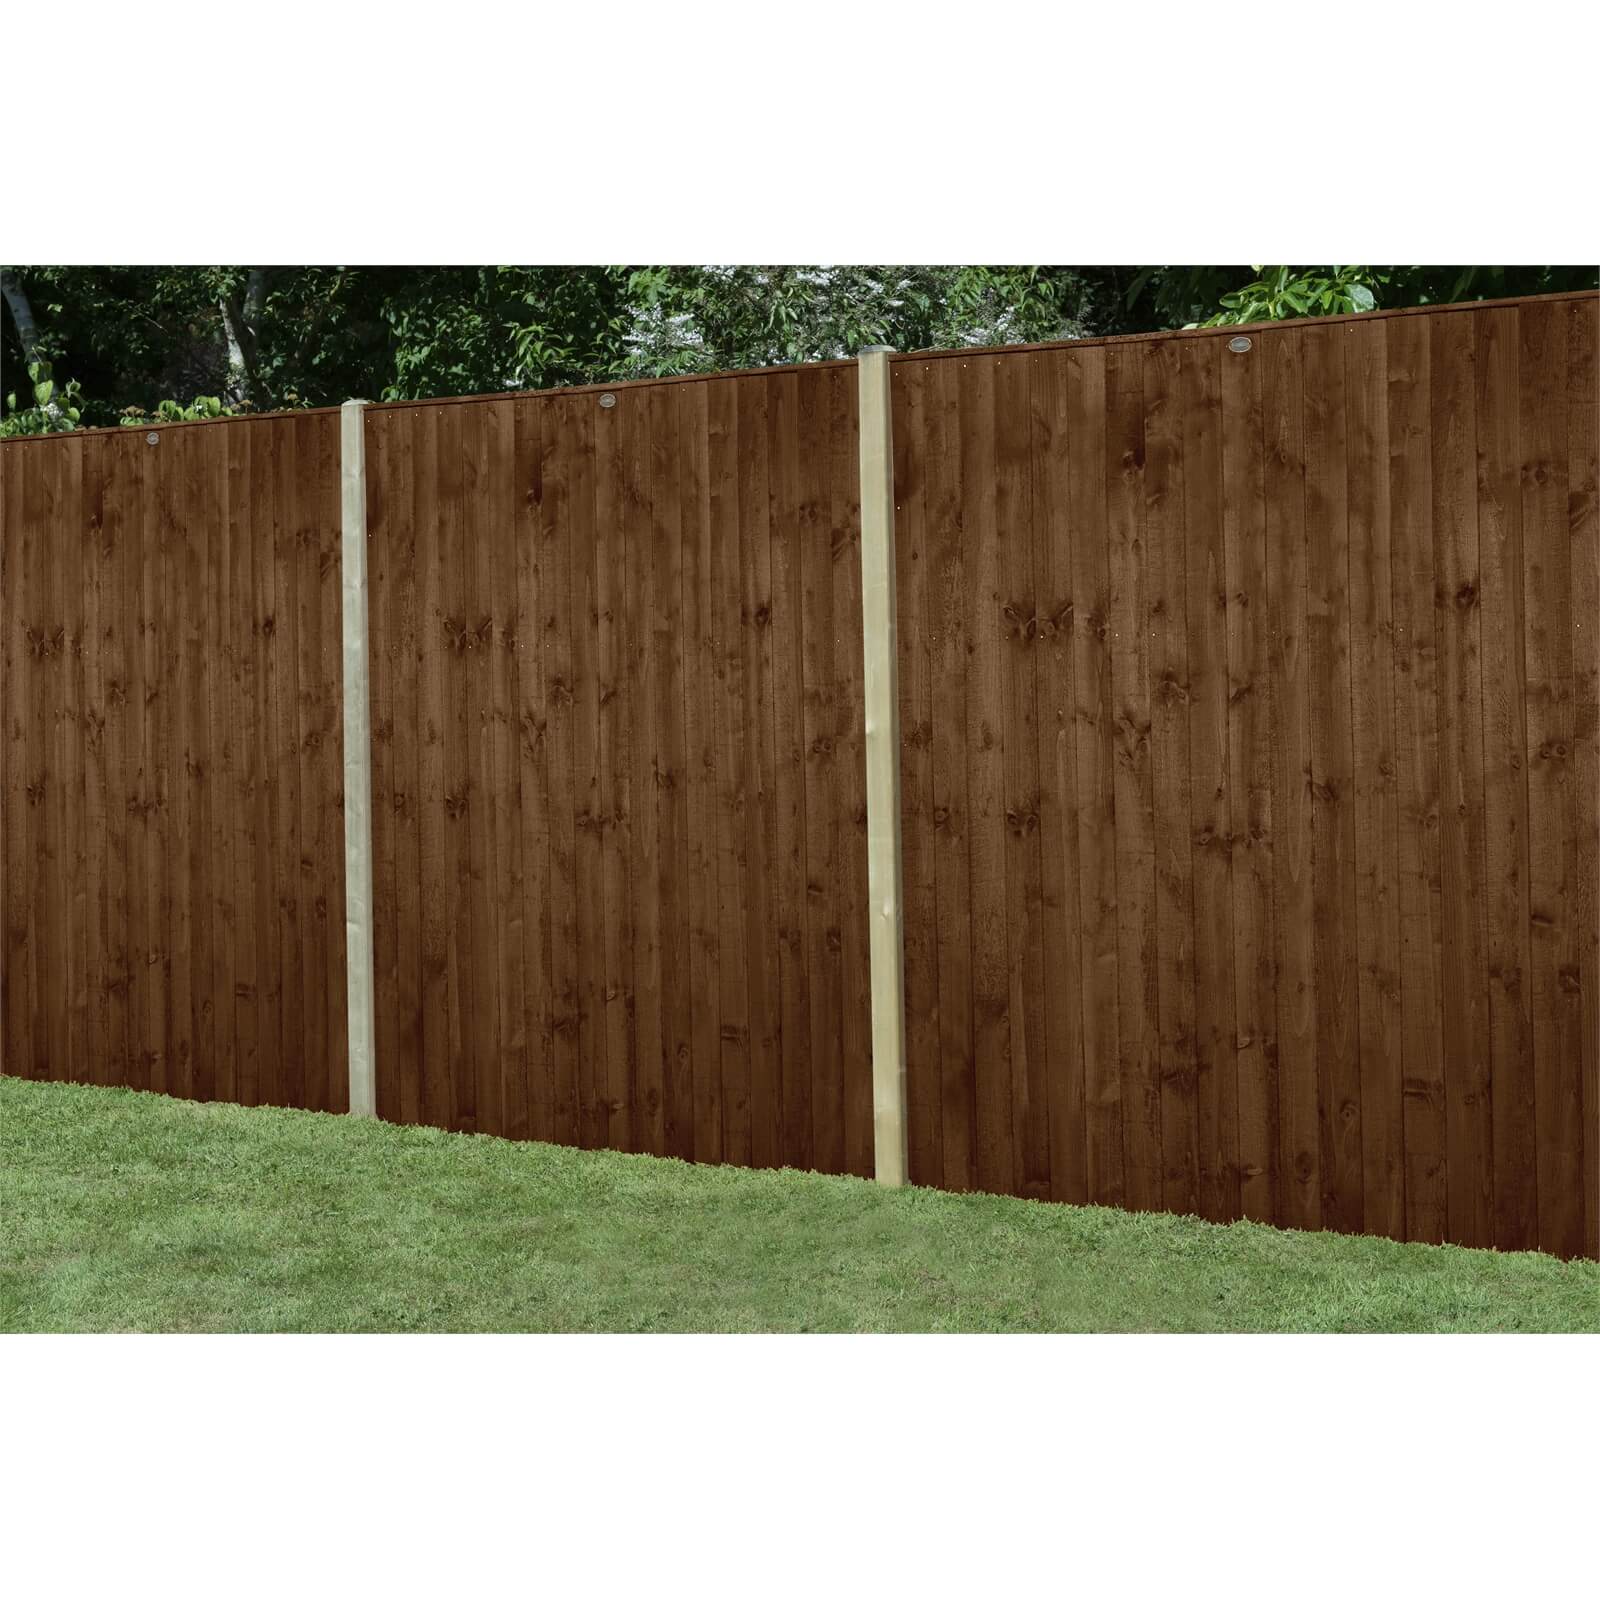 6ft x 6ft (1.83m x 1.85m) Pressure Treated Featheredge Fence Panel (Dark Brown) - Pack of 3